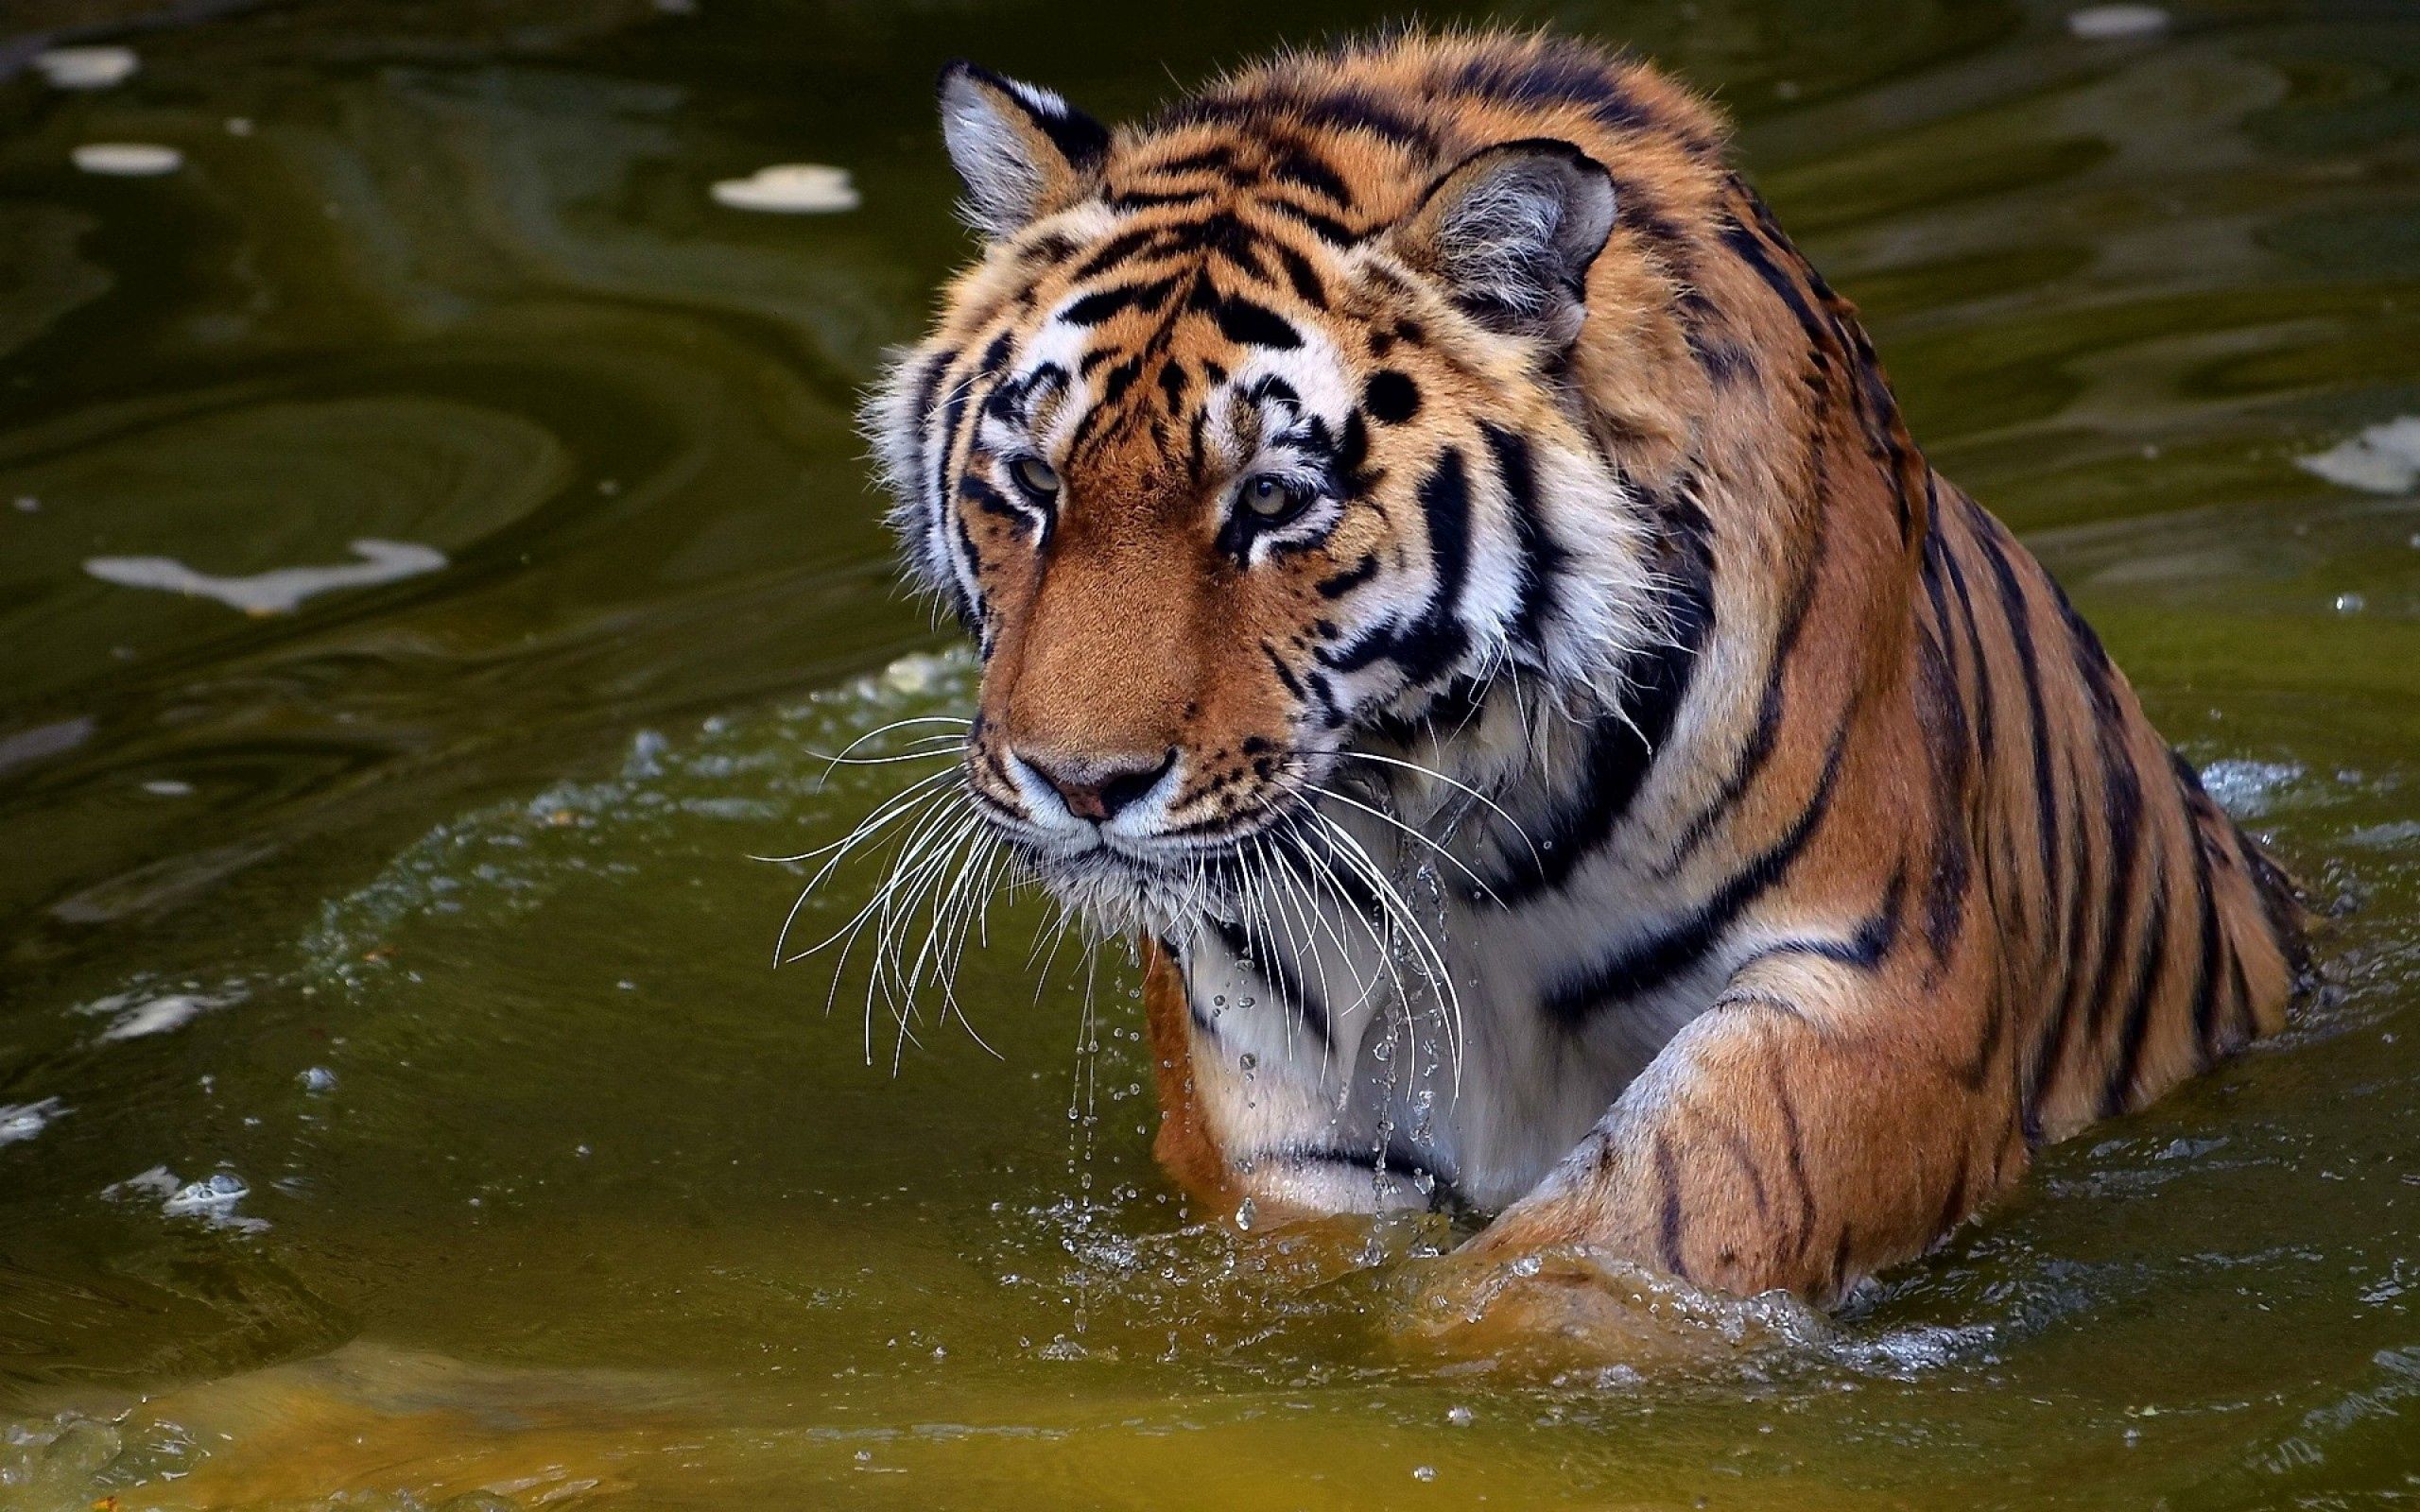 muzzle, water, bathe, animals, predator, tiger wallpapers for tablet